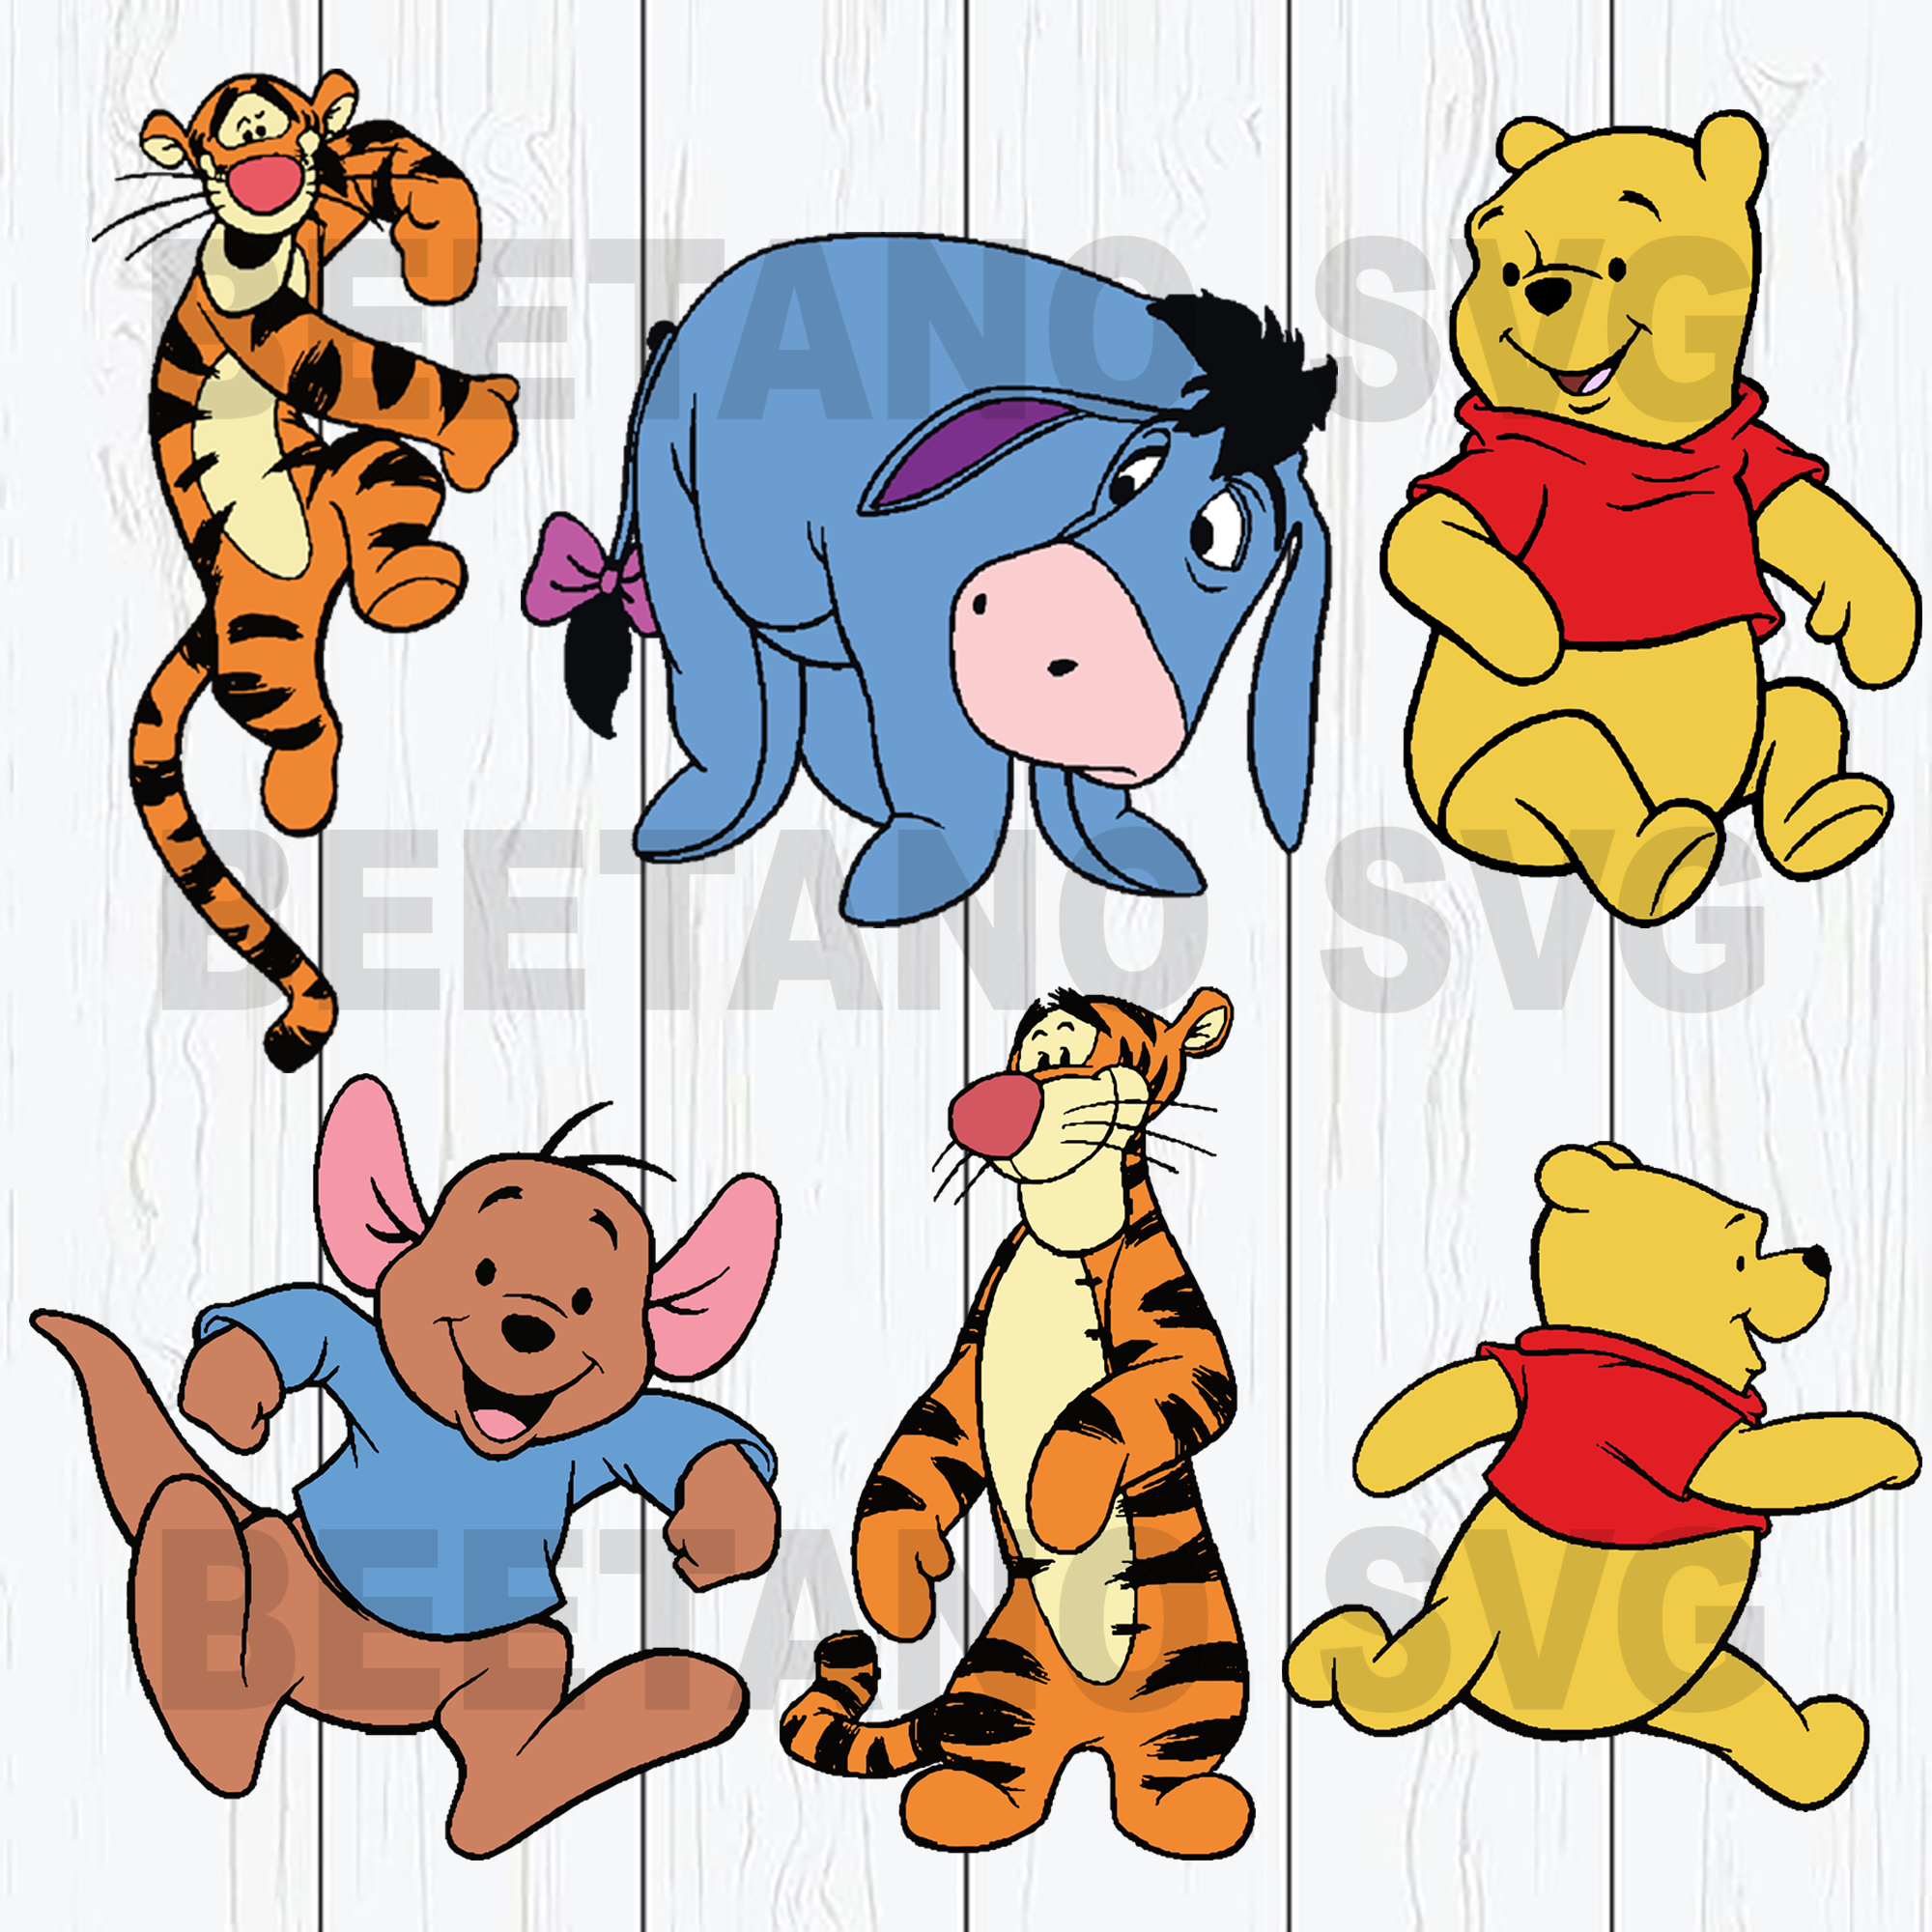 Download Winnie The Pooh Eps Winnie The Pooh Svg Winnie The Pooh Pooh Dxf Winnie The Pooh Png Pooh Svg Winnie The Pooh Dxf Pooh Png The Pooh Digital Art Collectibles Tripod Ee